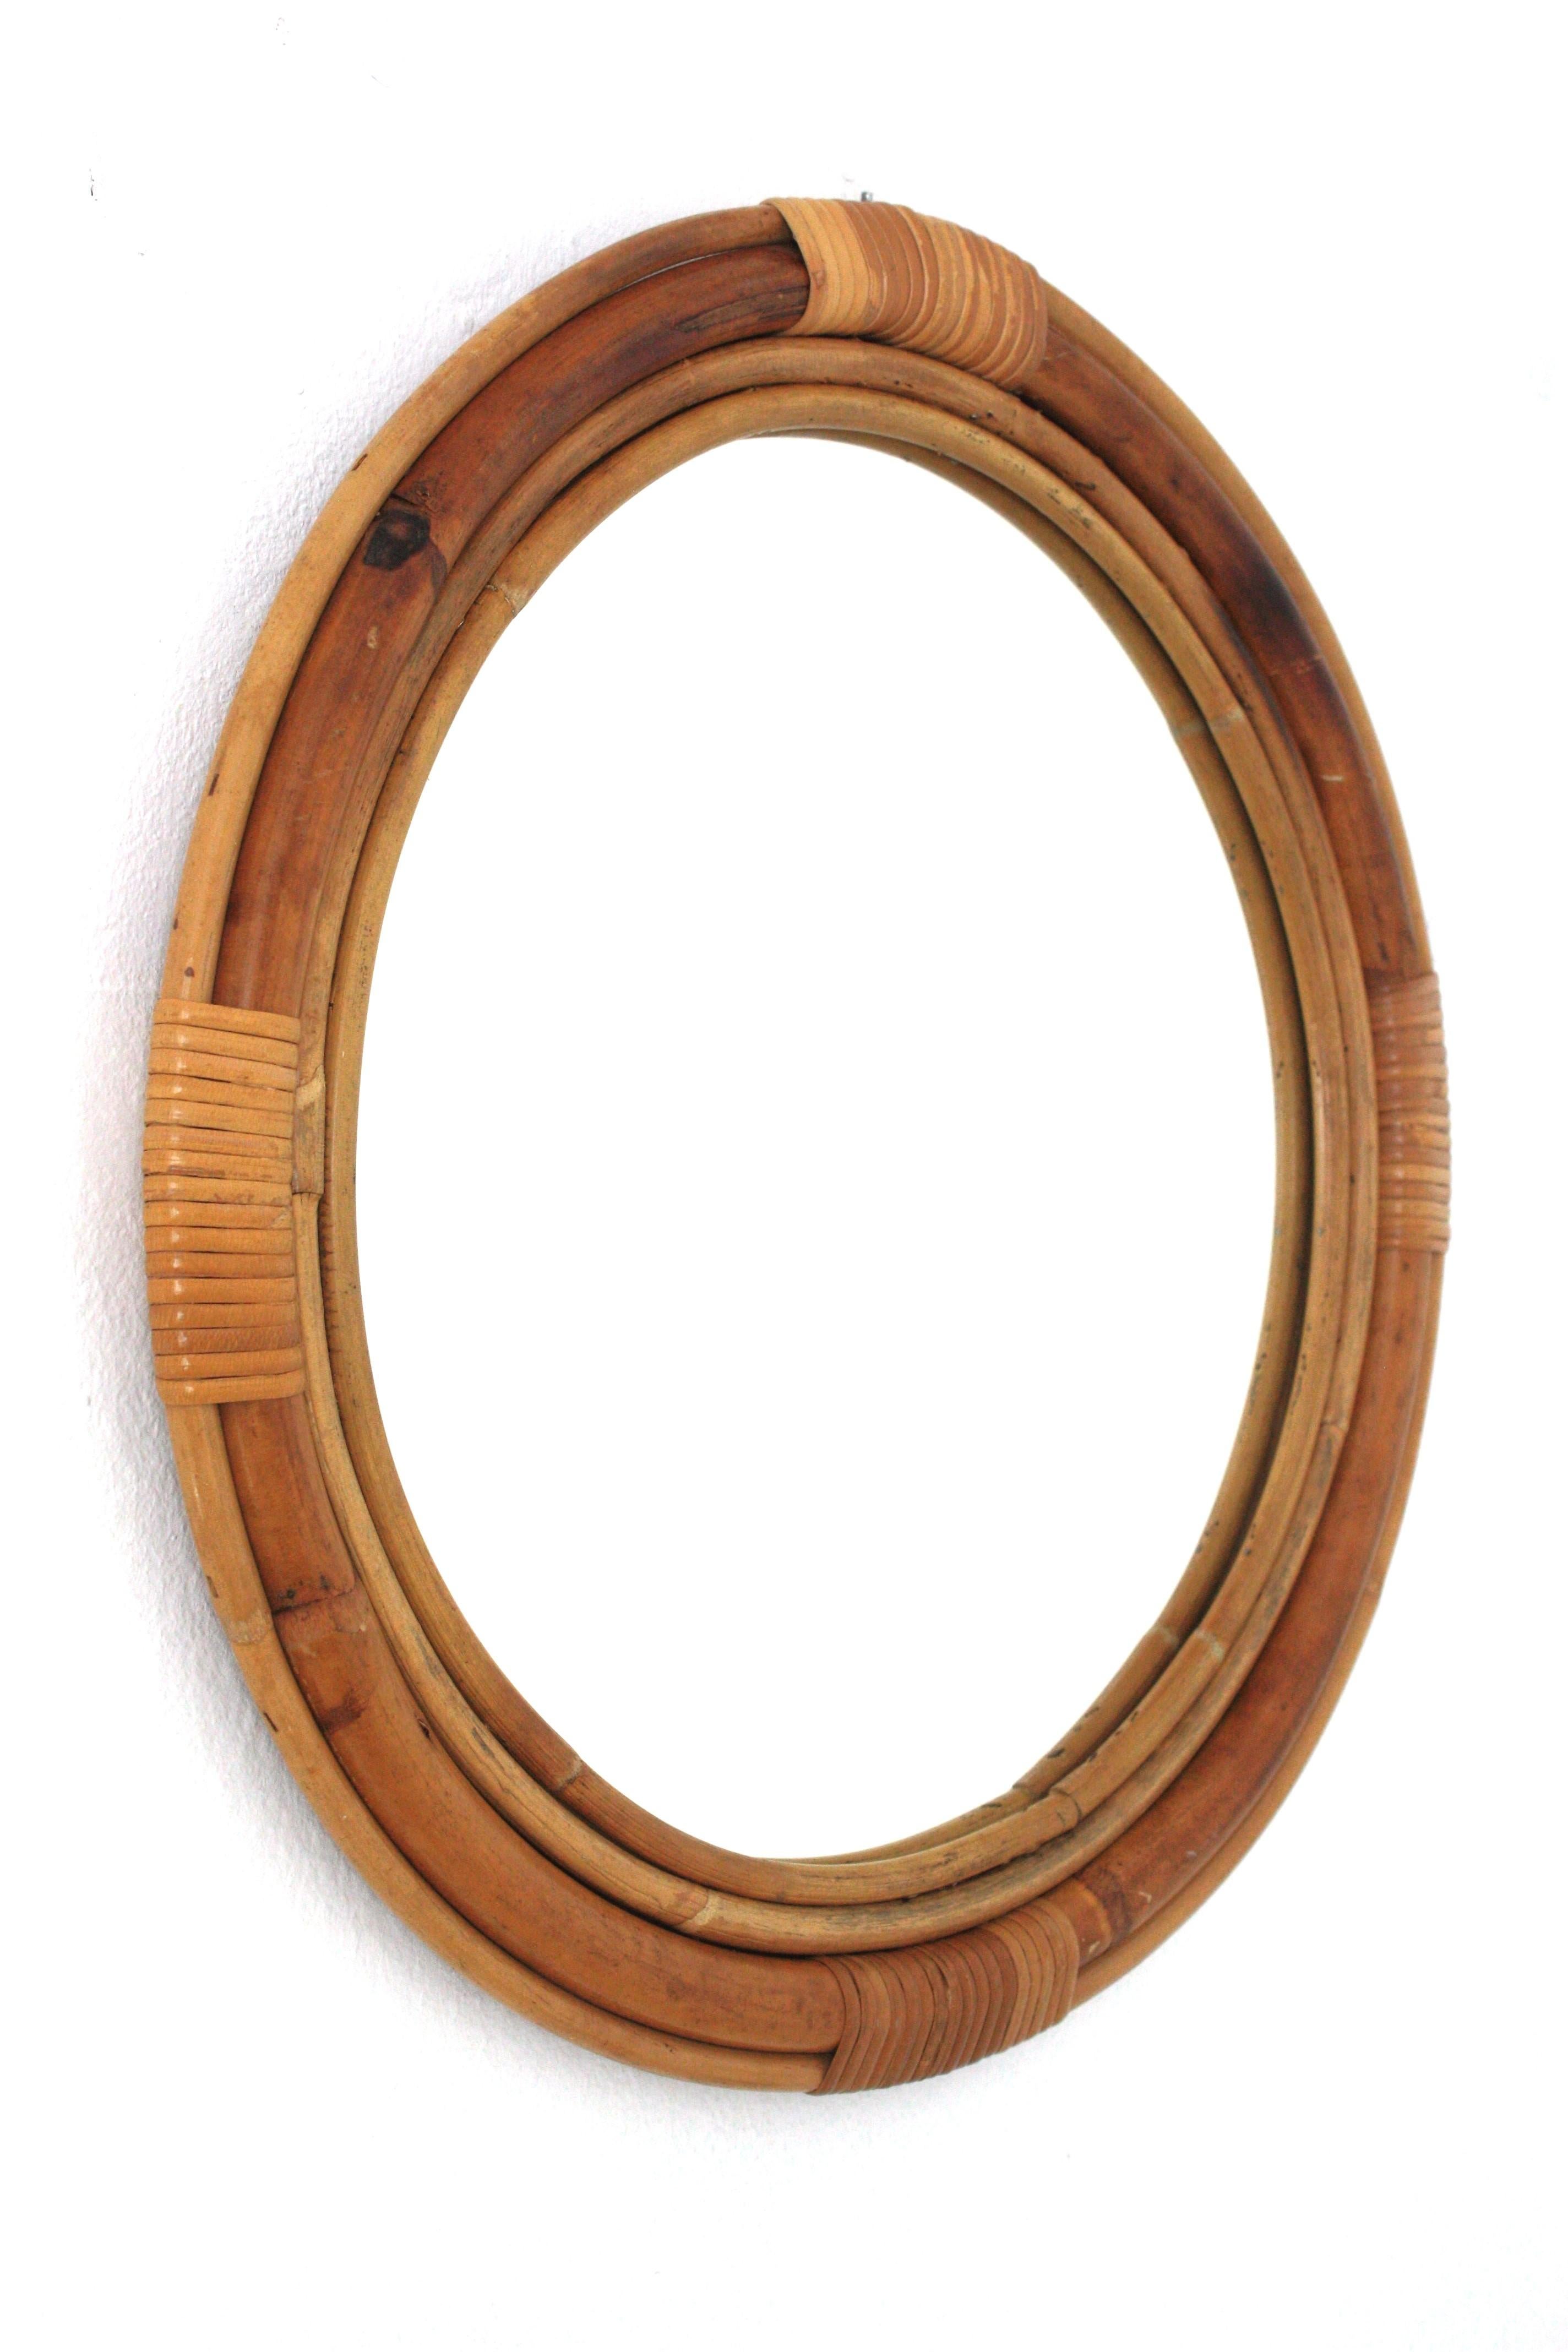 Hand-Crafted Spanish Rattan Bamboo Round Wall Mirror, 1950s For Sale